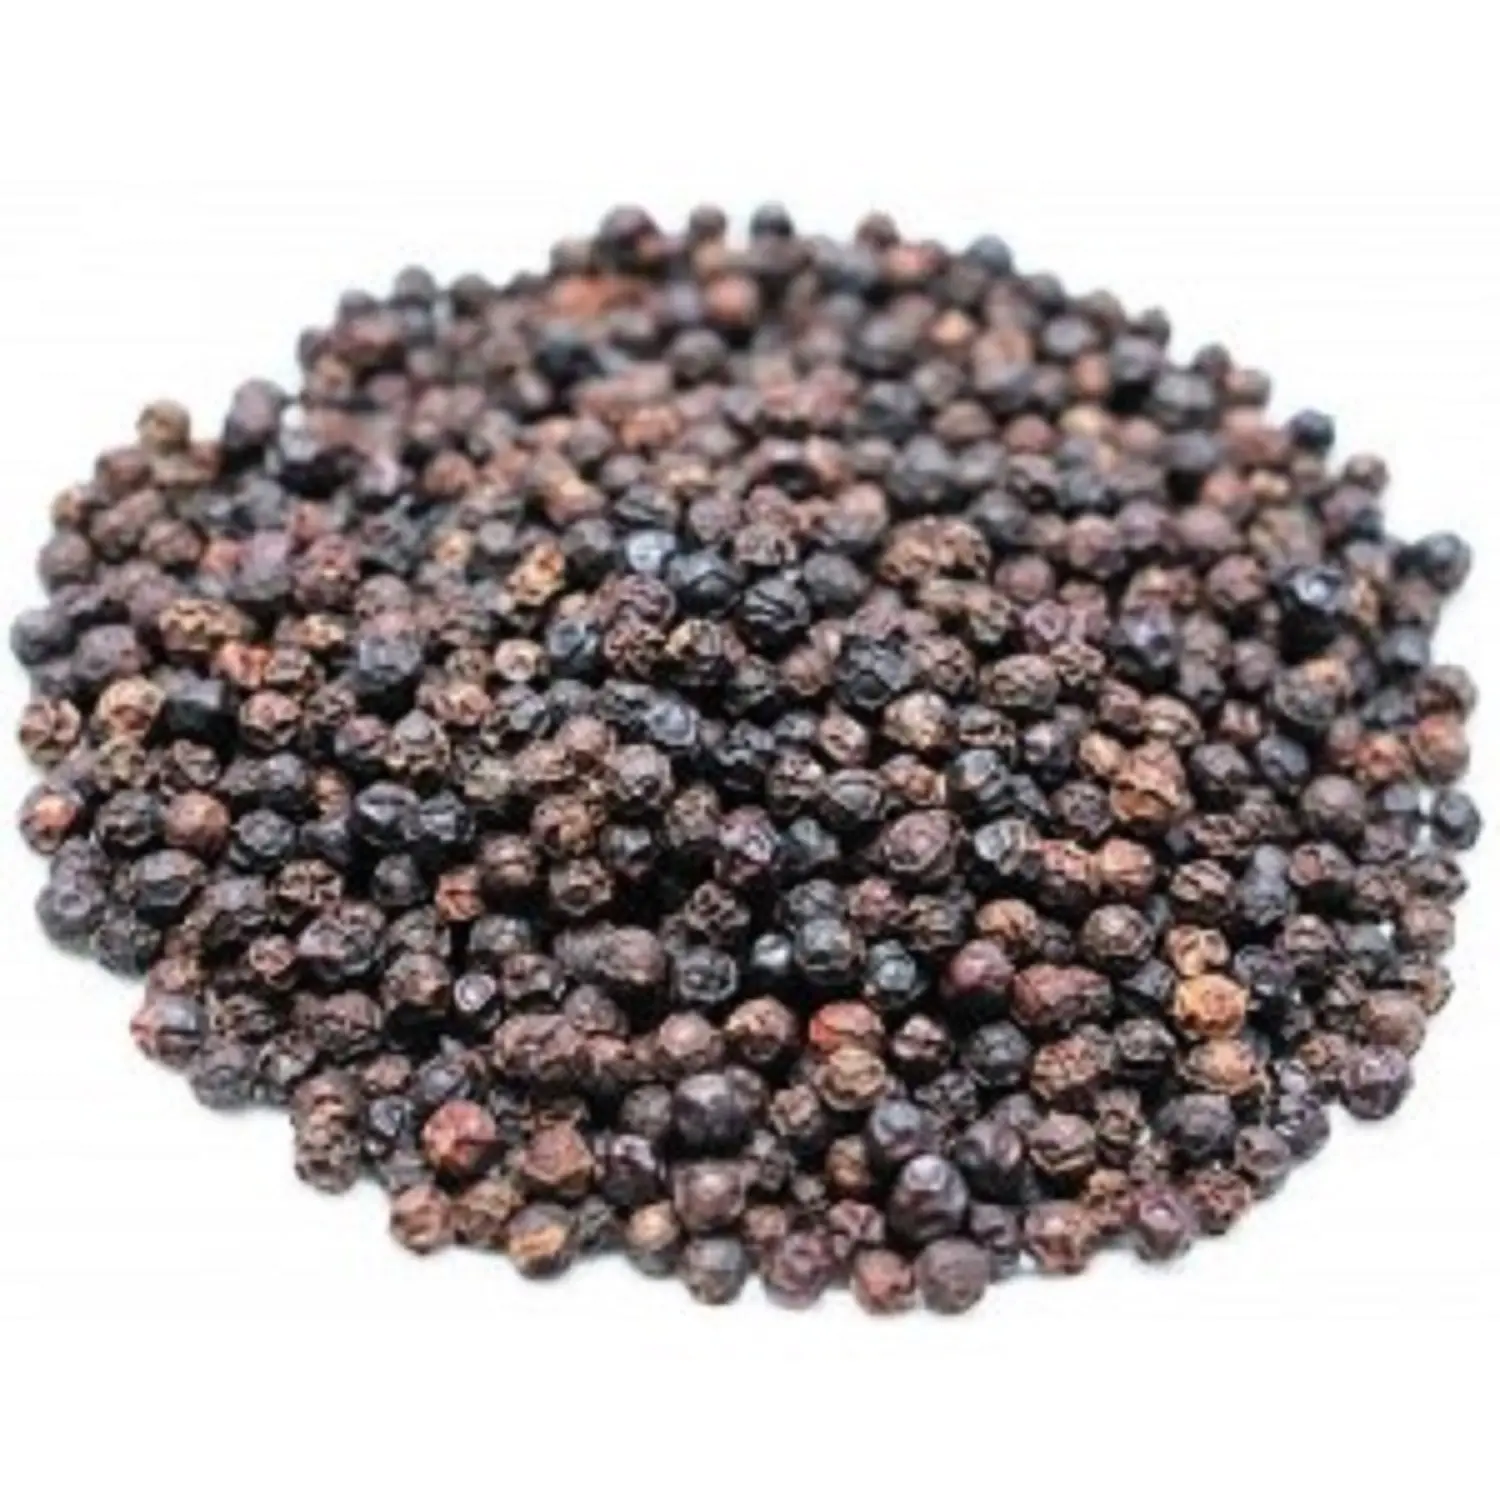 Best Quality Organic Black Pepper Single Herbs & Spices from Vietnam at Low Wholesale Price